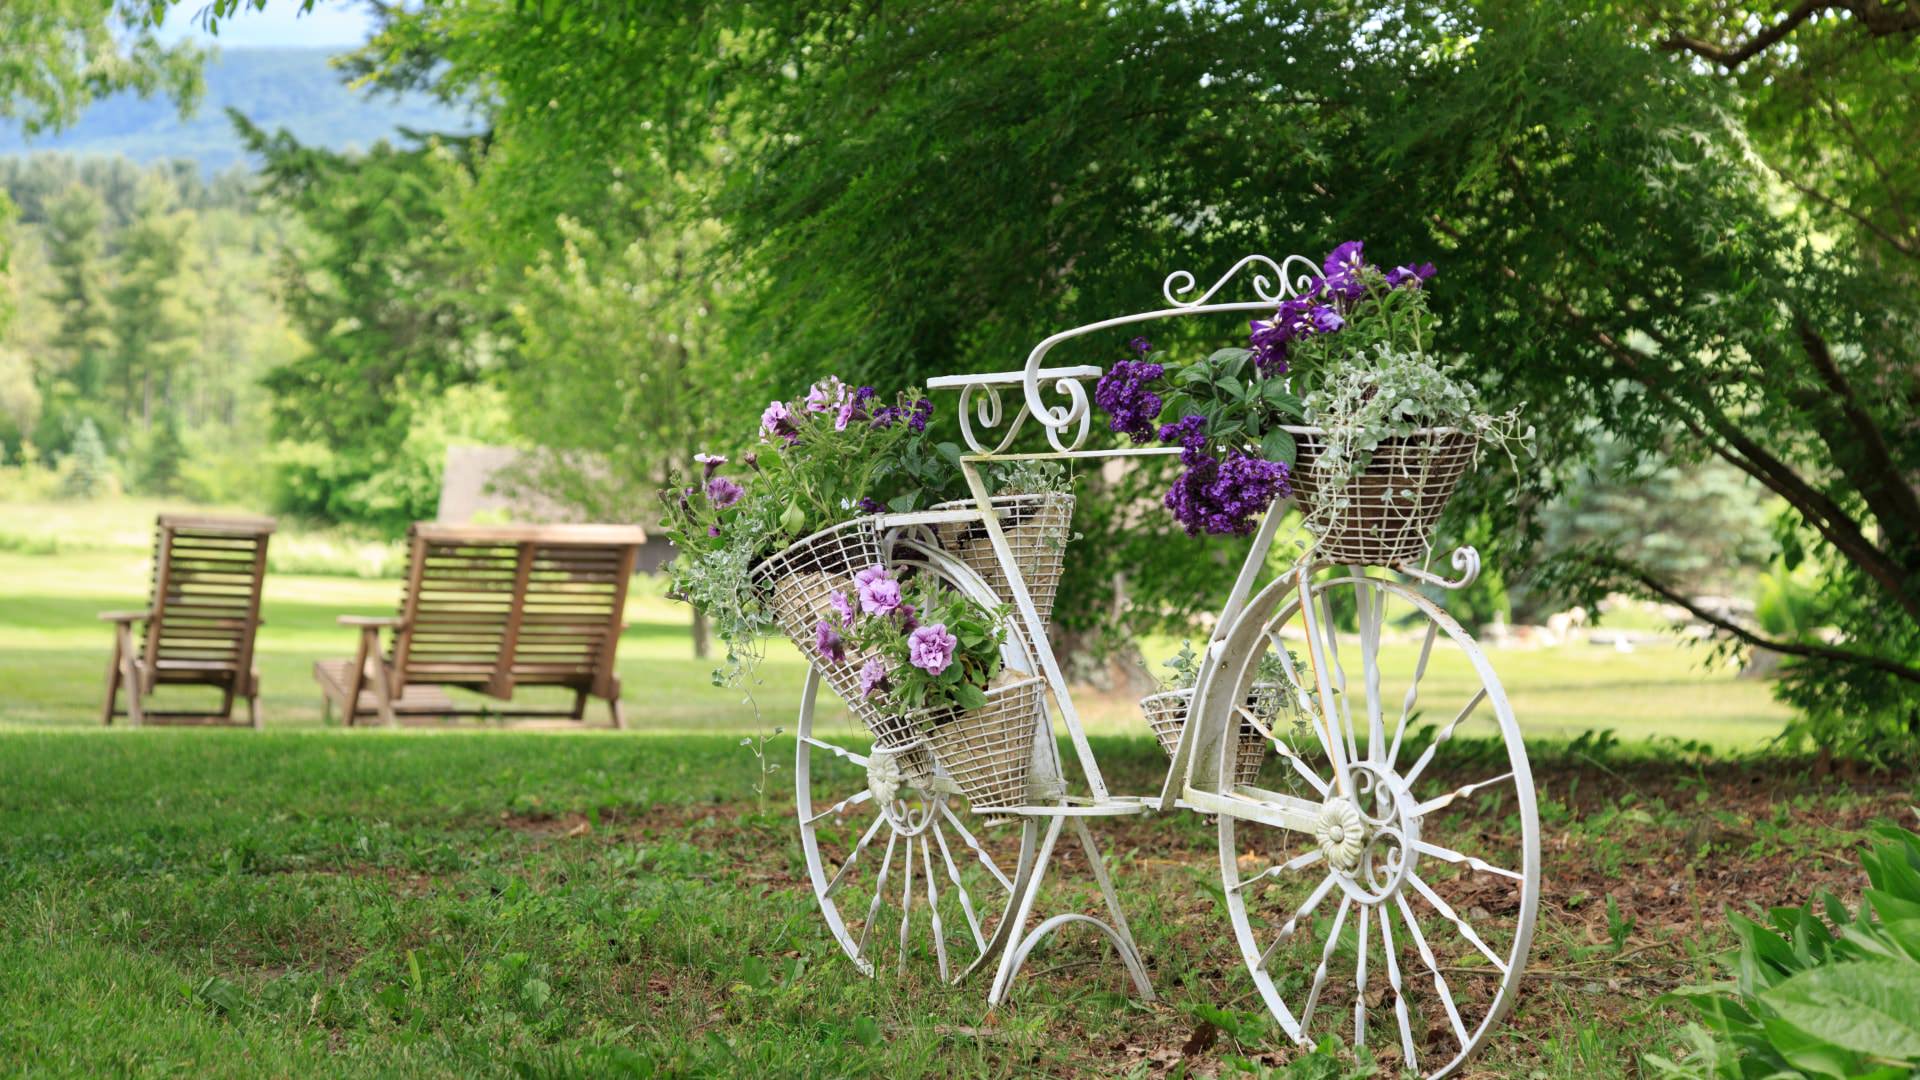 Antique white iron bike with flower baskets holding purple flowers with trees and grass in the background